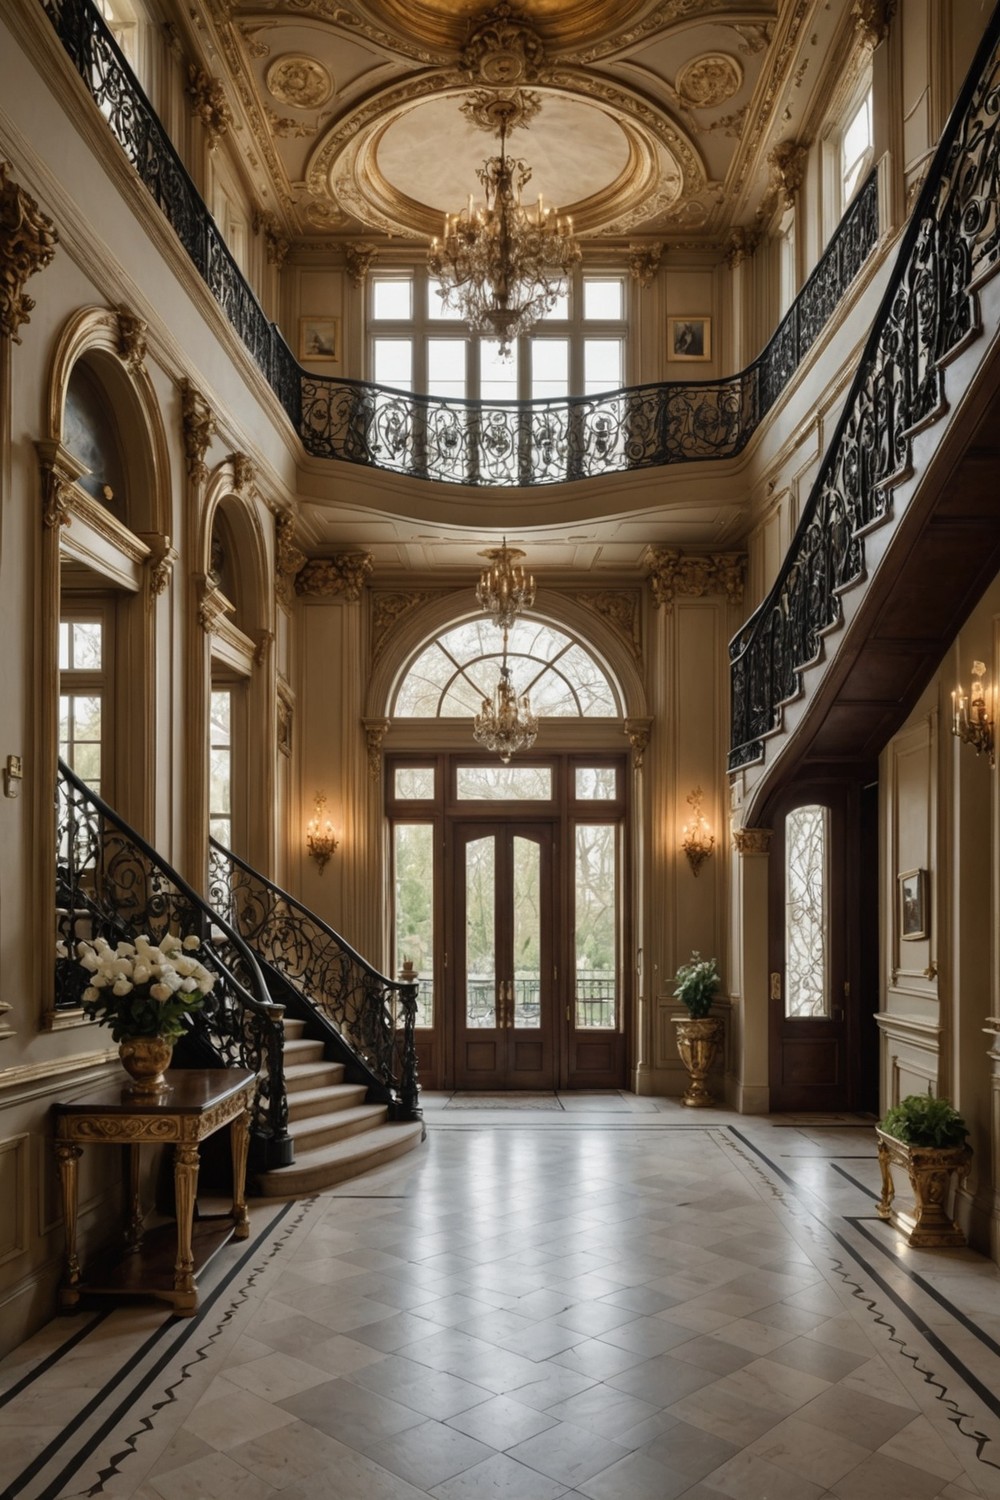 Regency-Style Architecture: Columns, Arches, and Ornate Details